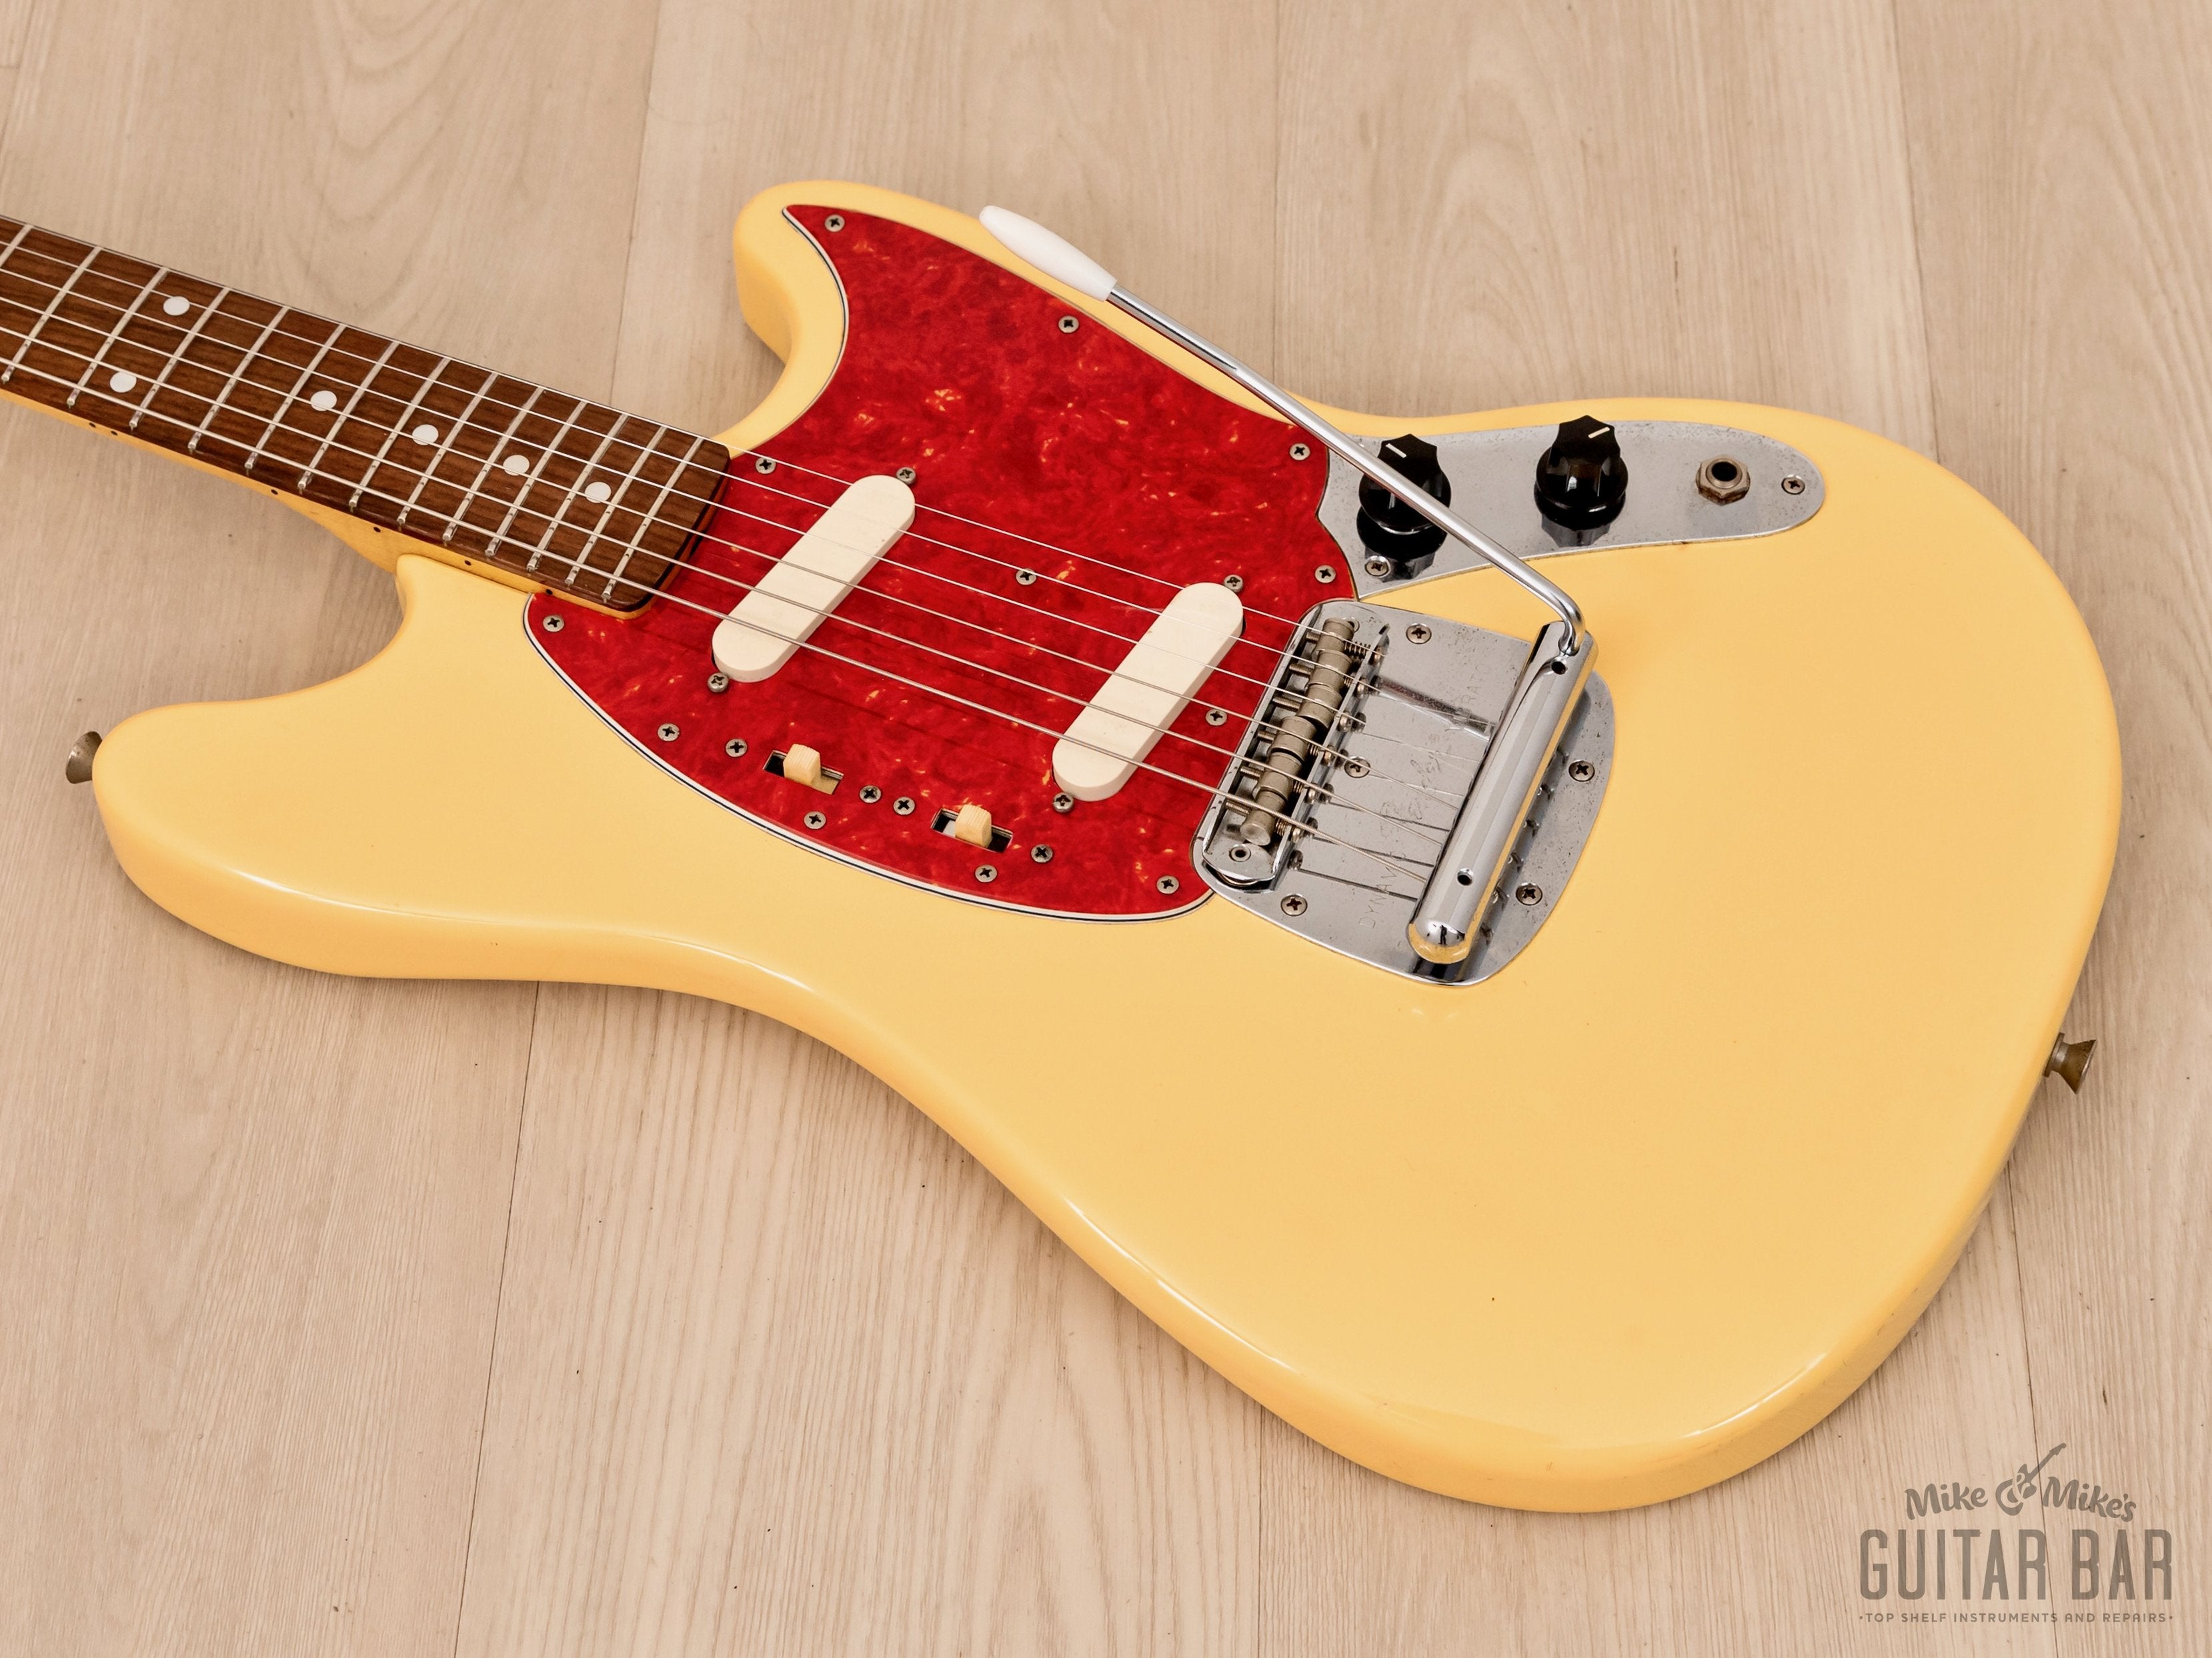 1996 Fender Mustang '69 Vintage Reissue MG69-65 Yellow White